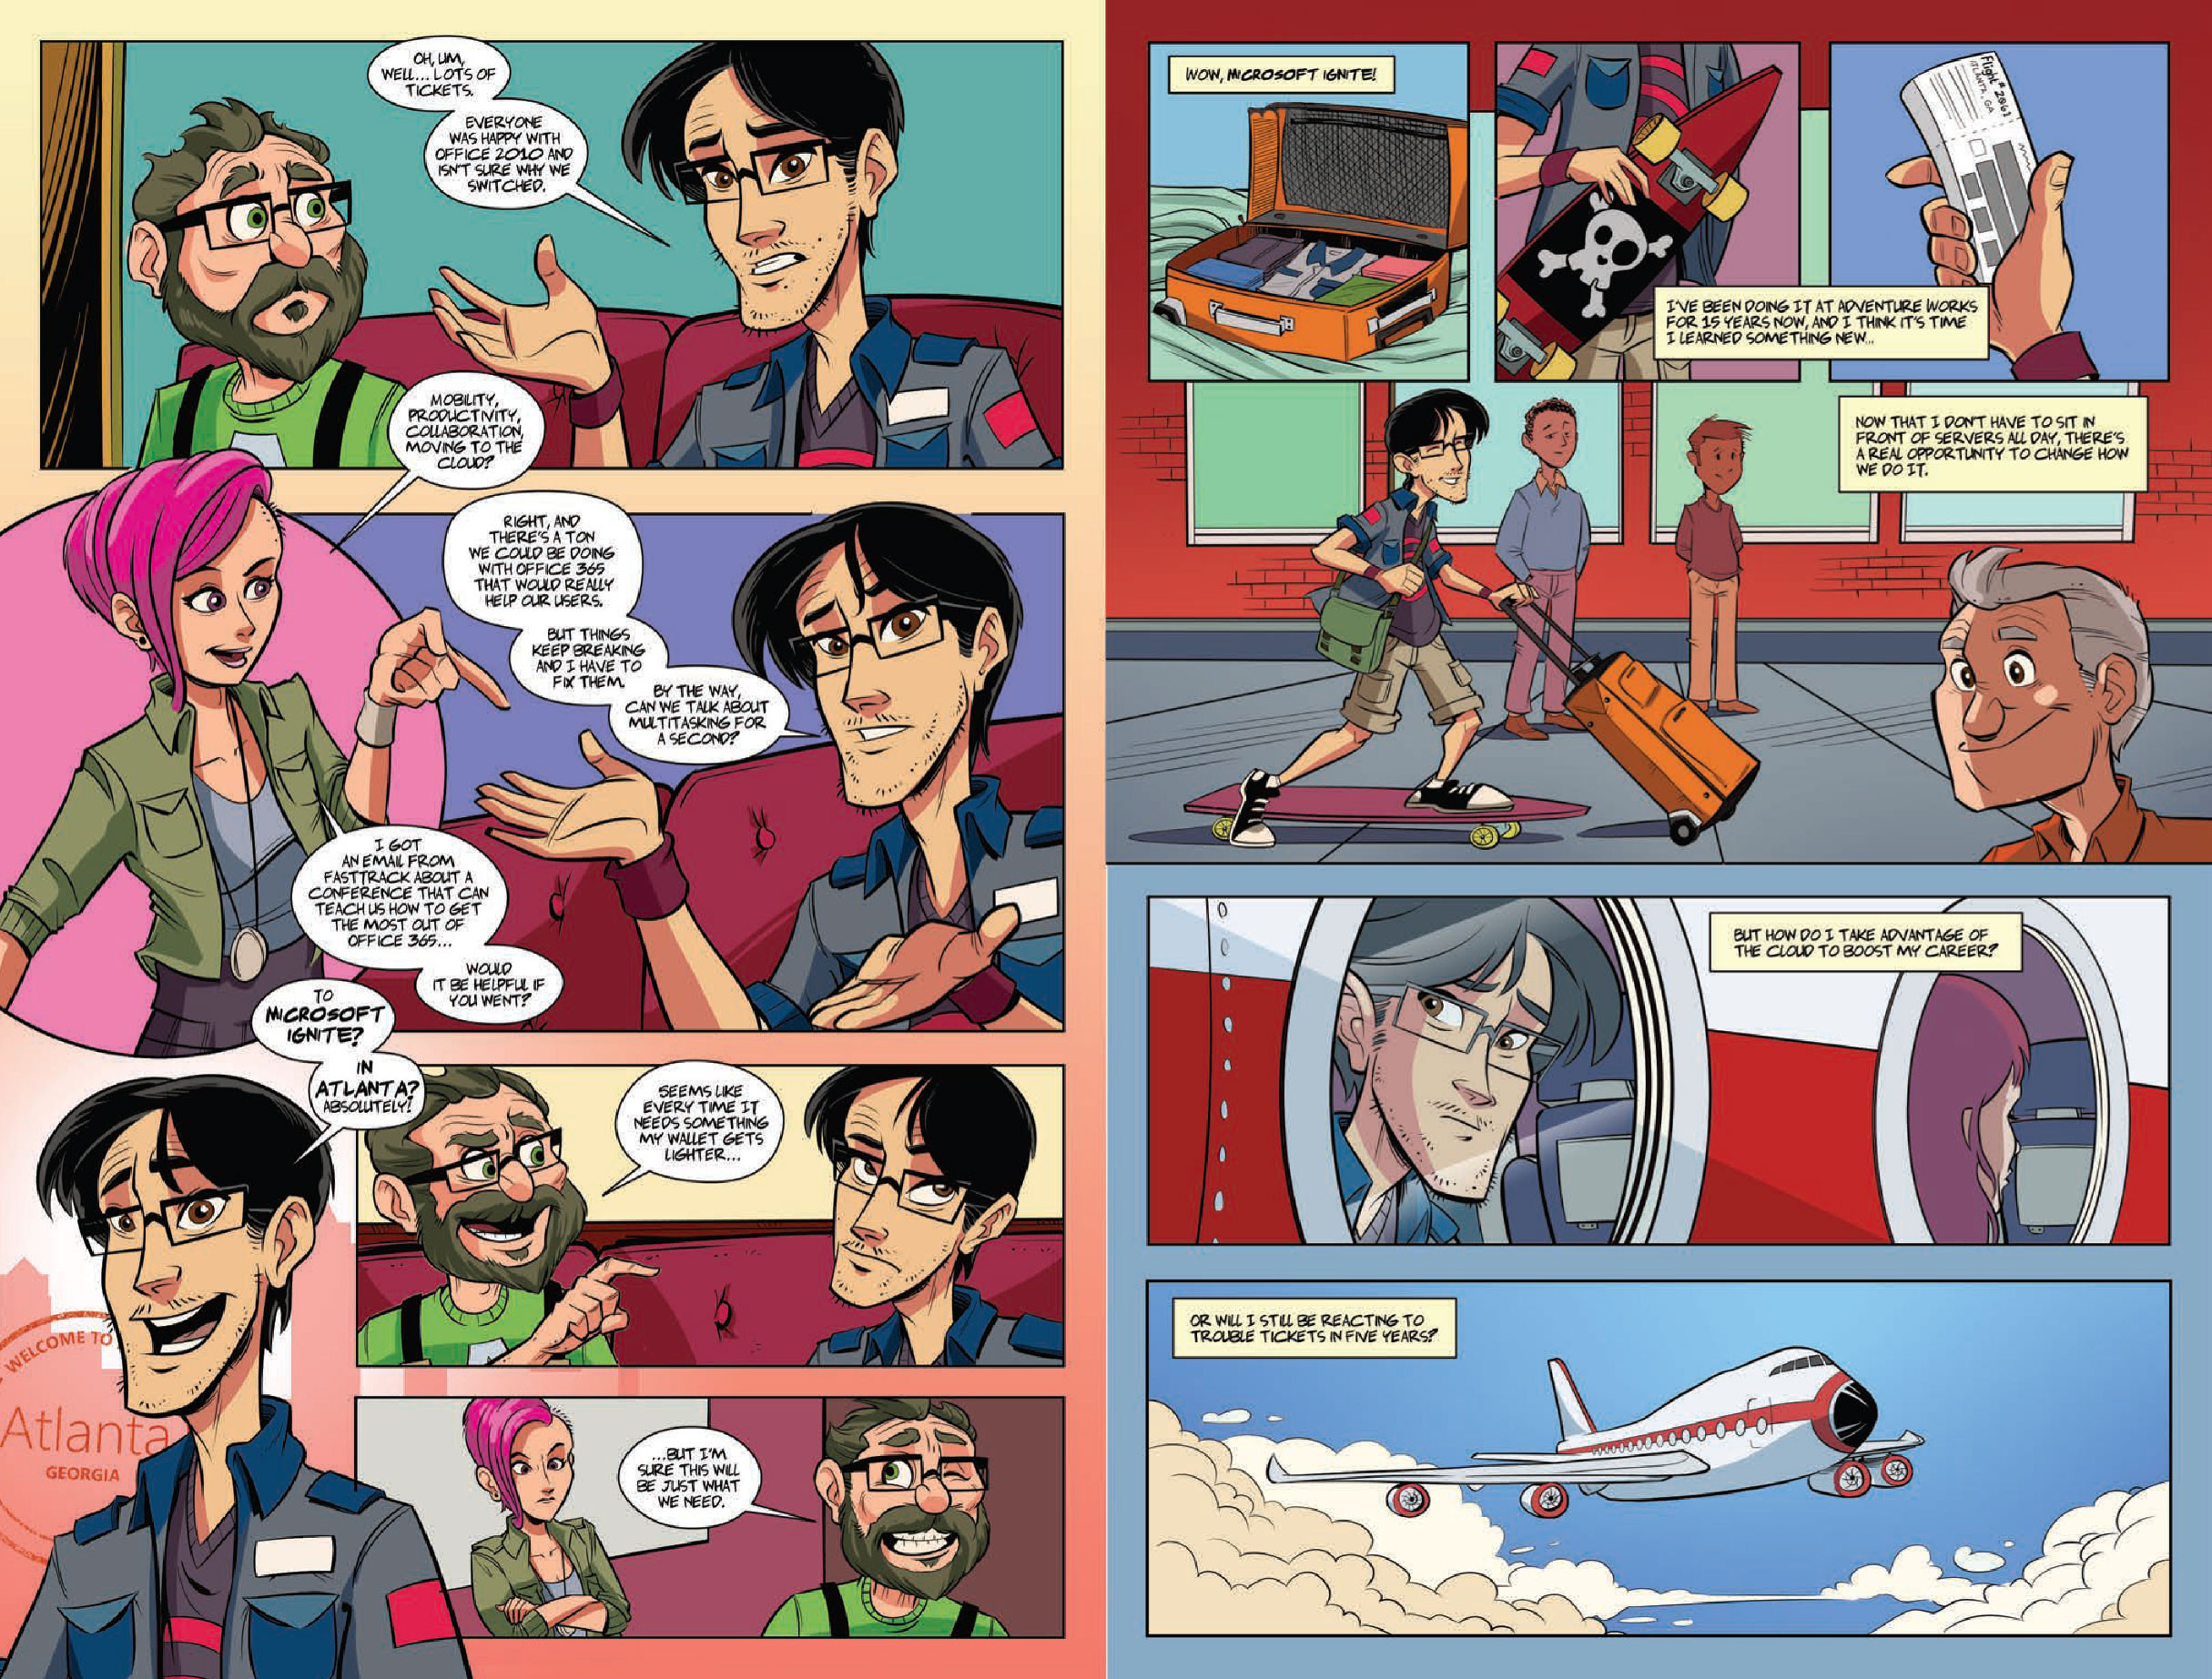 Spread from #7, "IT Pro Power Up!" 